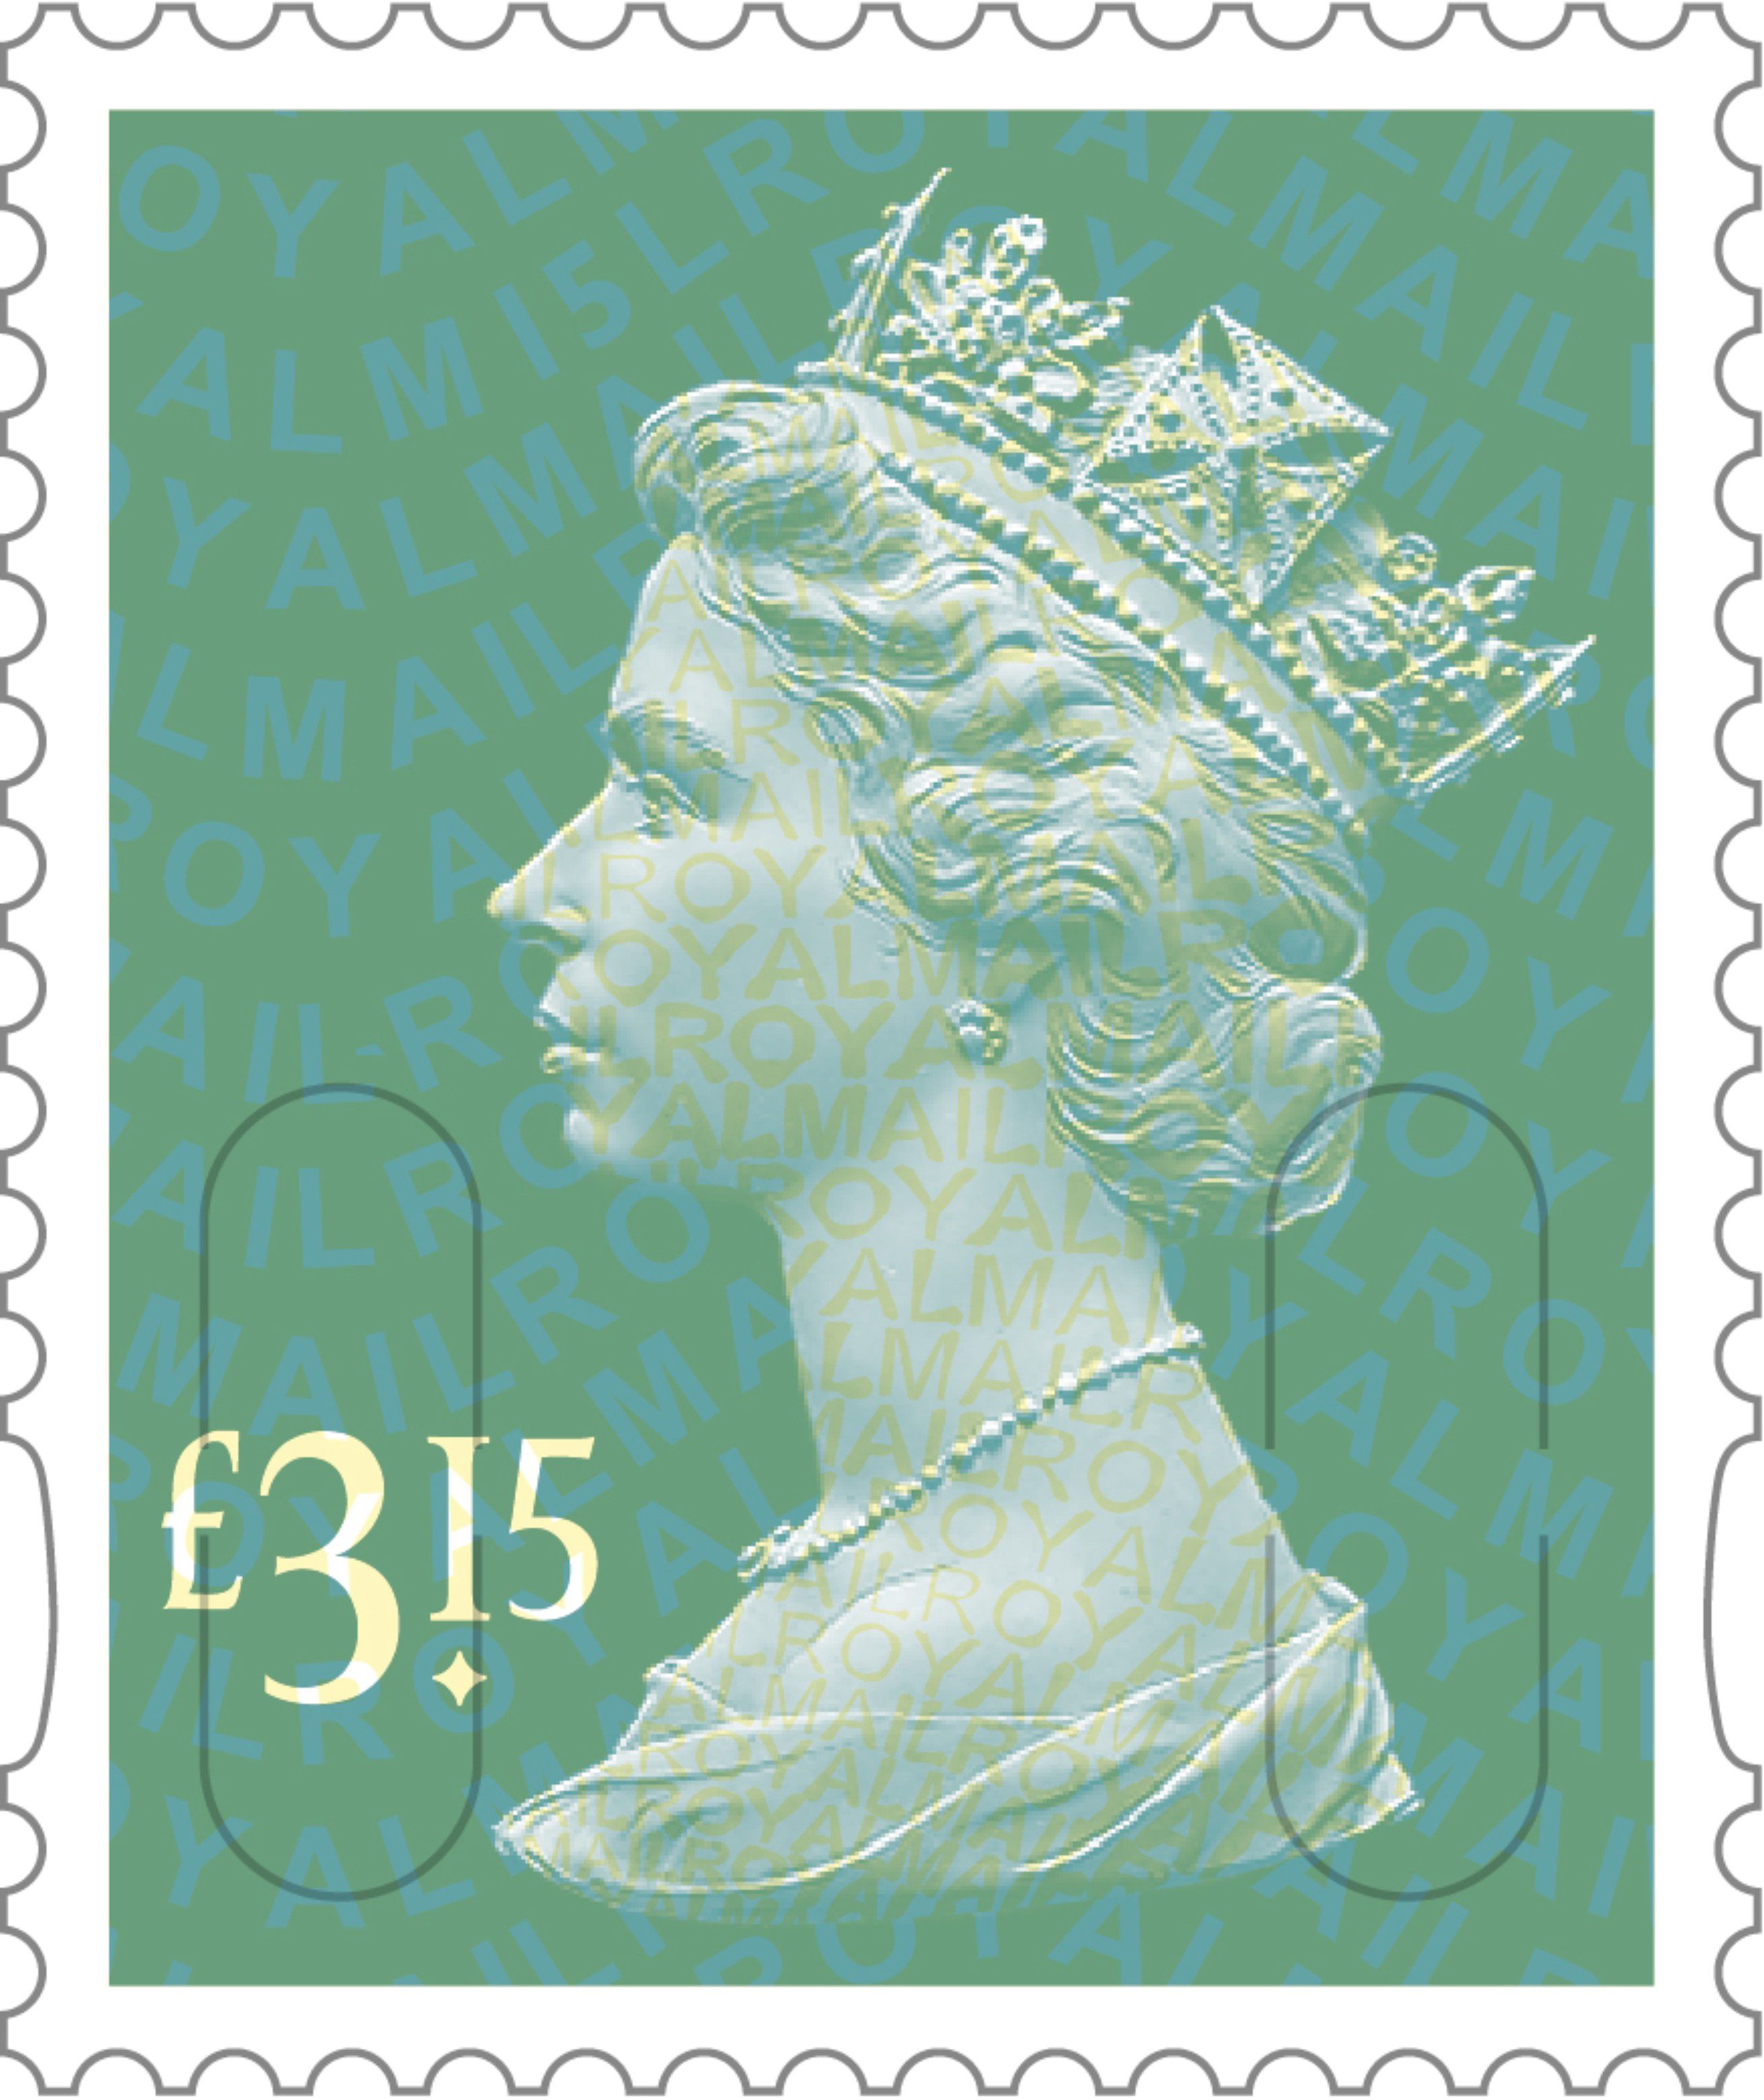 British Stamps for 2015 : Collect GB Stamps | Filatelia | Pinterest ...